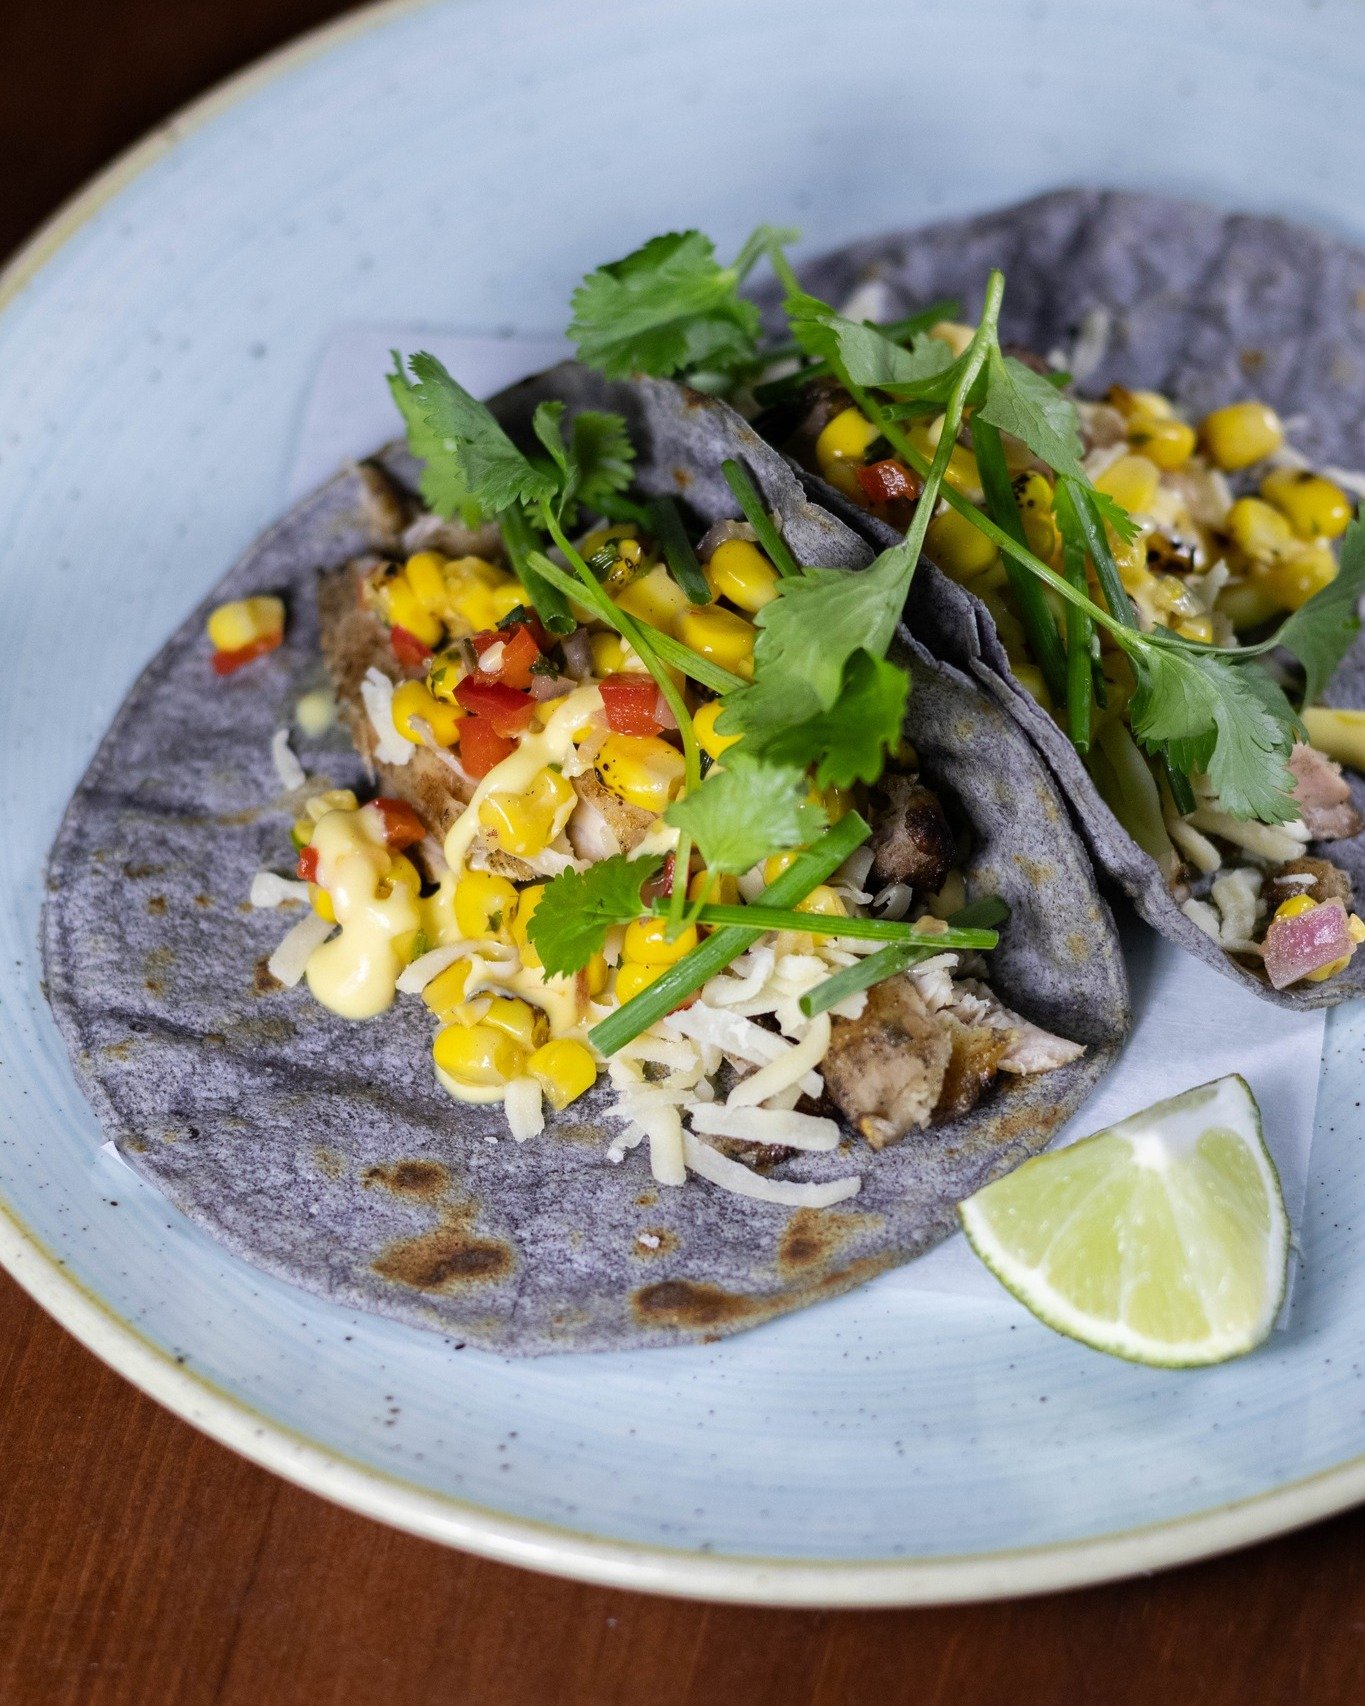 🌮 New Taco of the Moment 🌮

We're fully embracing backyard barbecue season with this woodfire-grilled chicken taco, available now in St. Paul! Topped with corn pico de gallo, chile crema, chives &amp; cilantro on a blue corn tortilla, this smoky ta